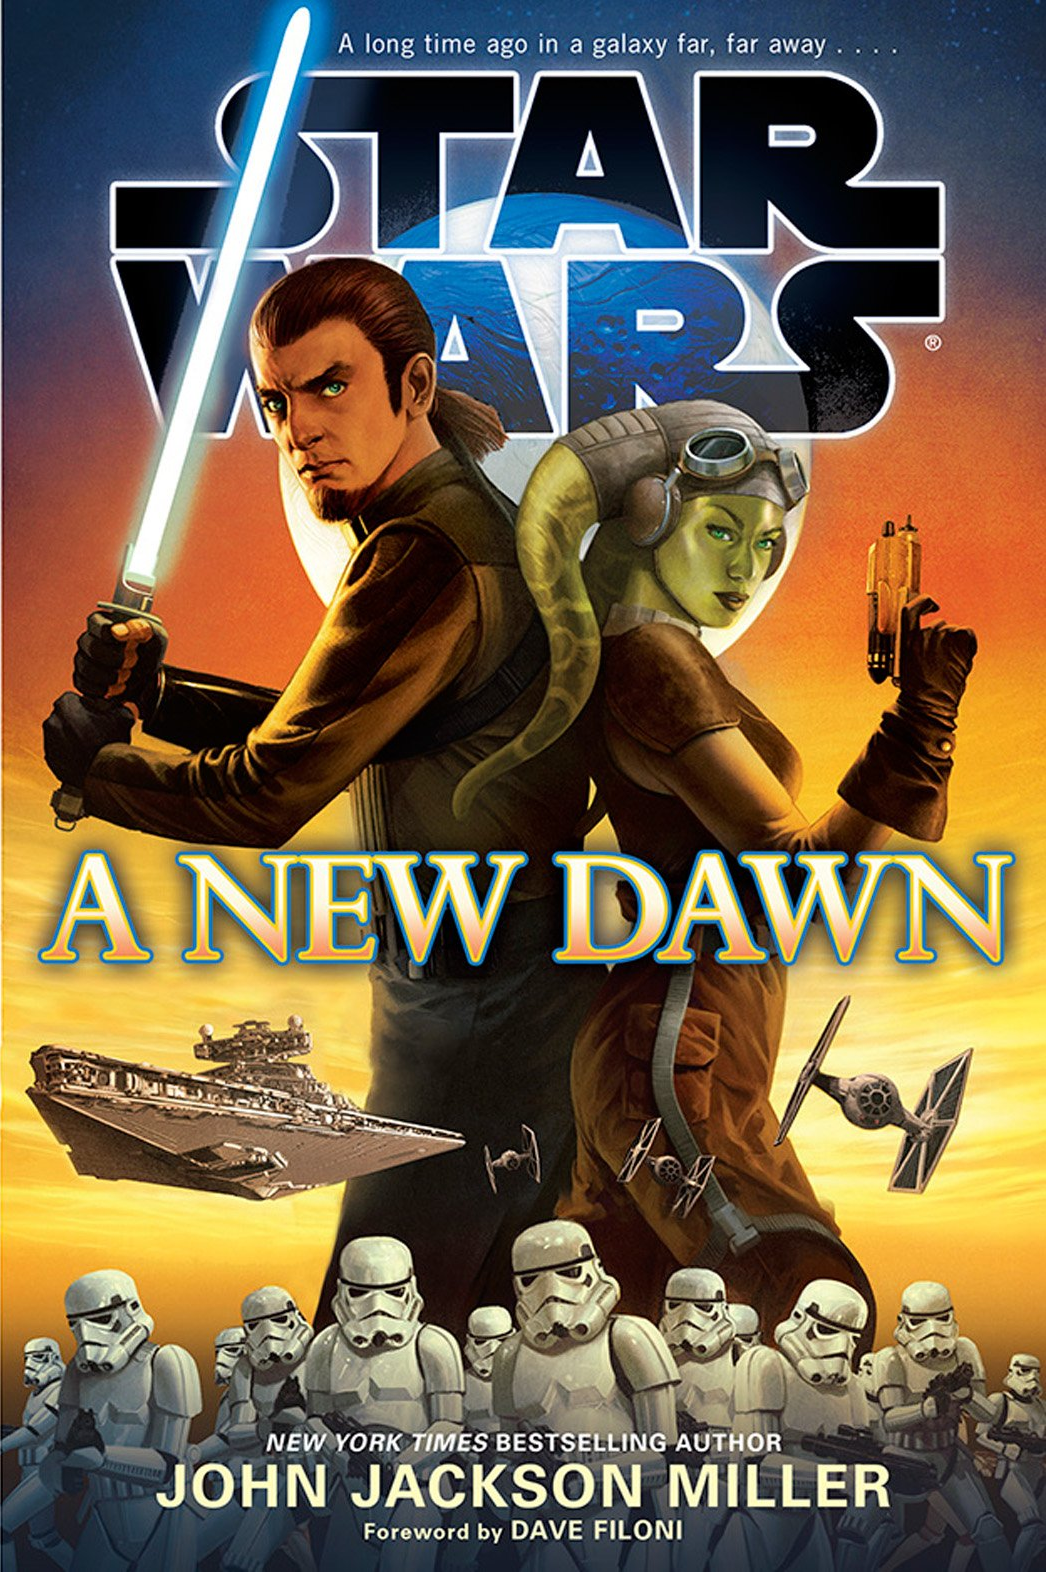 Star Wars: A New Dawn Review